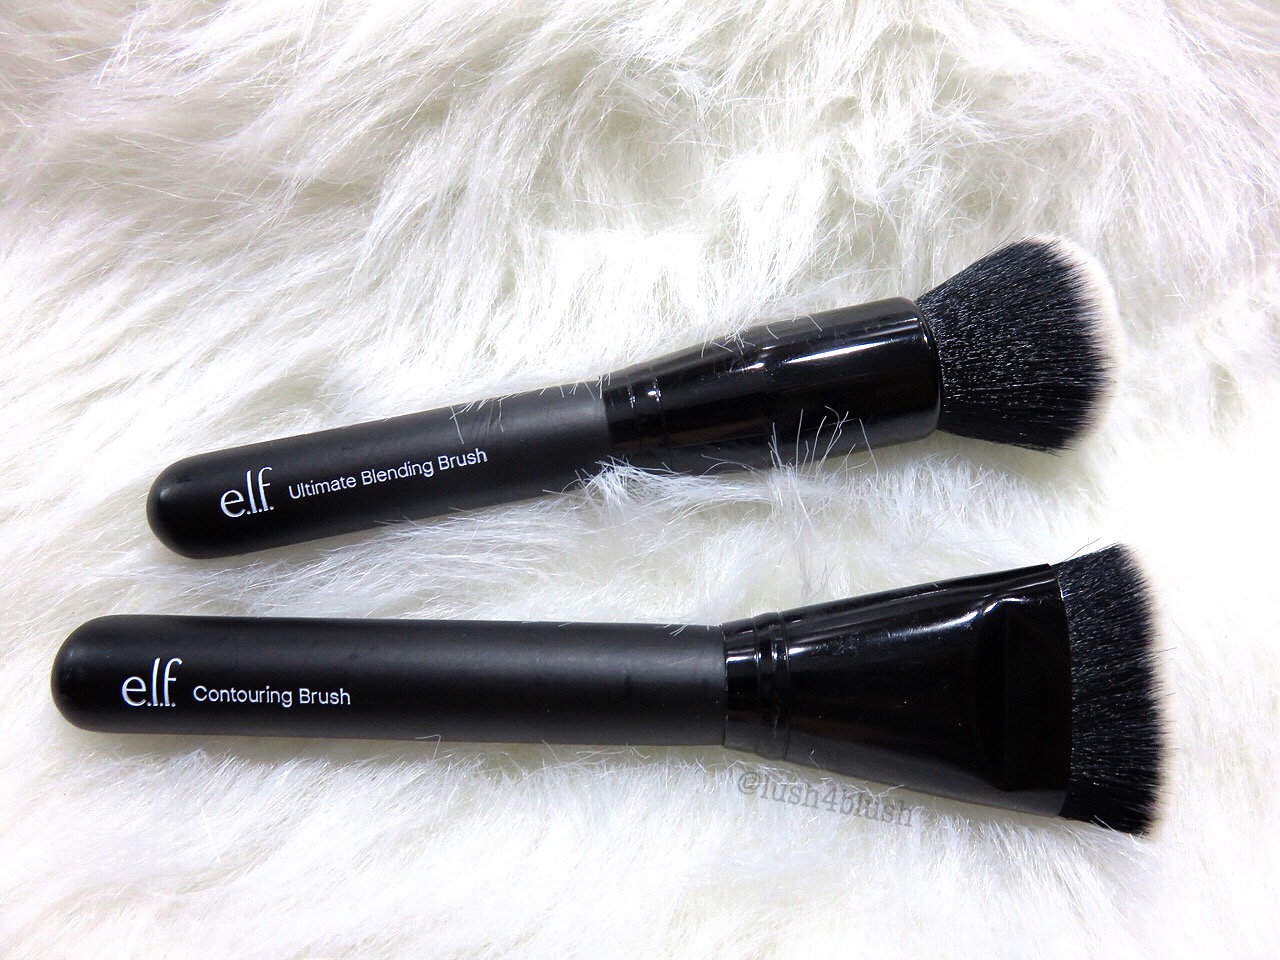 NEW Elf Cosmetics Contouring Brush and Ultimate Blending Brush Review